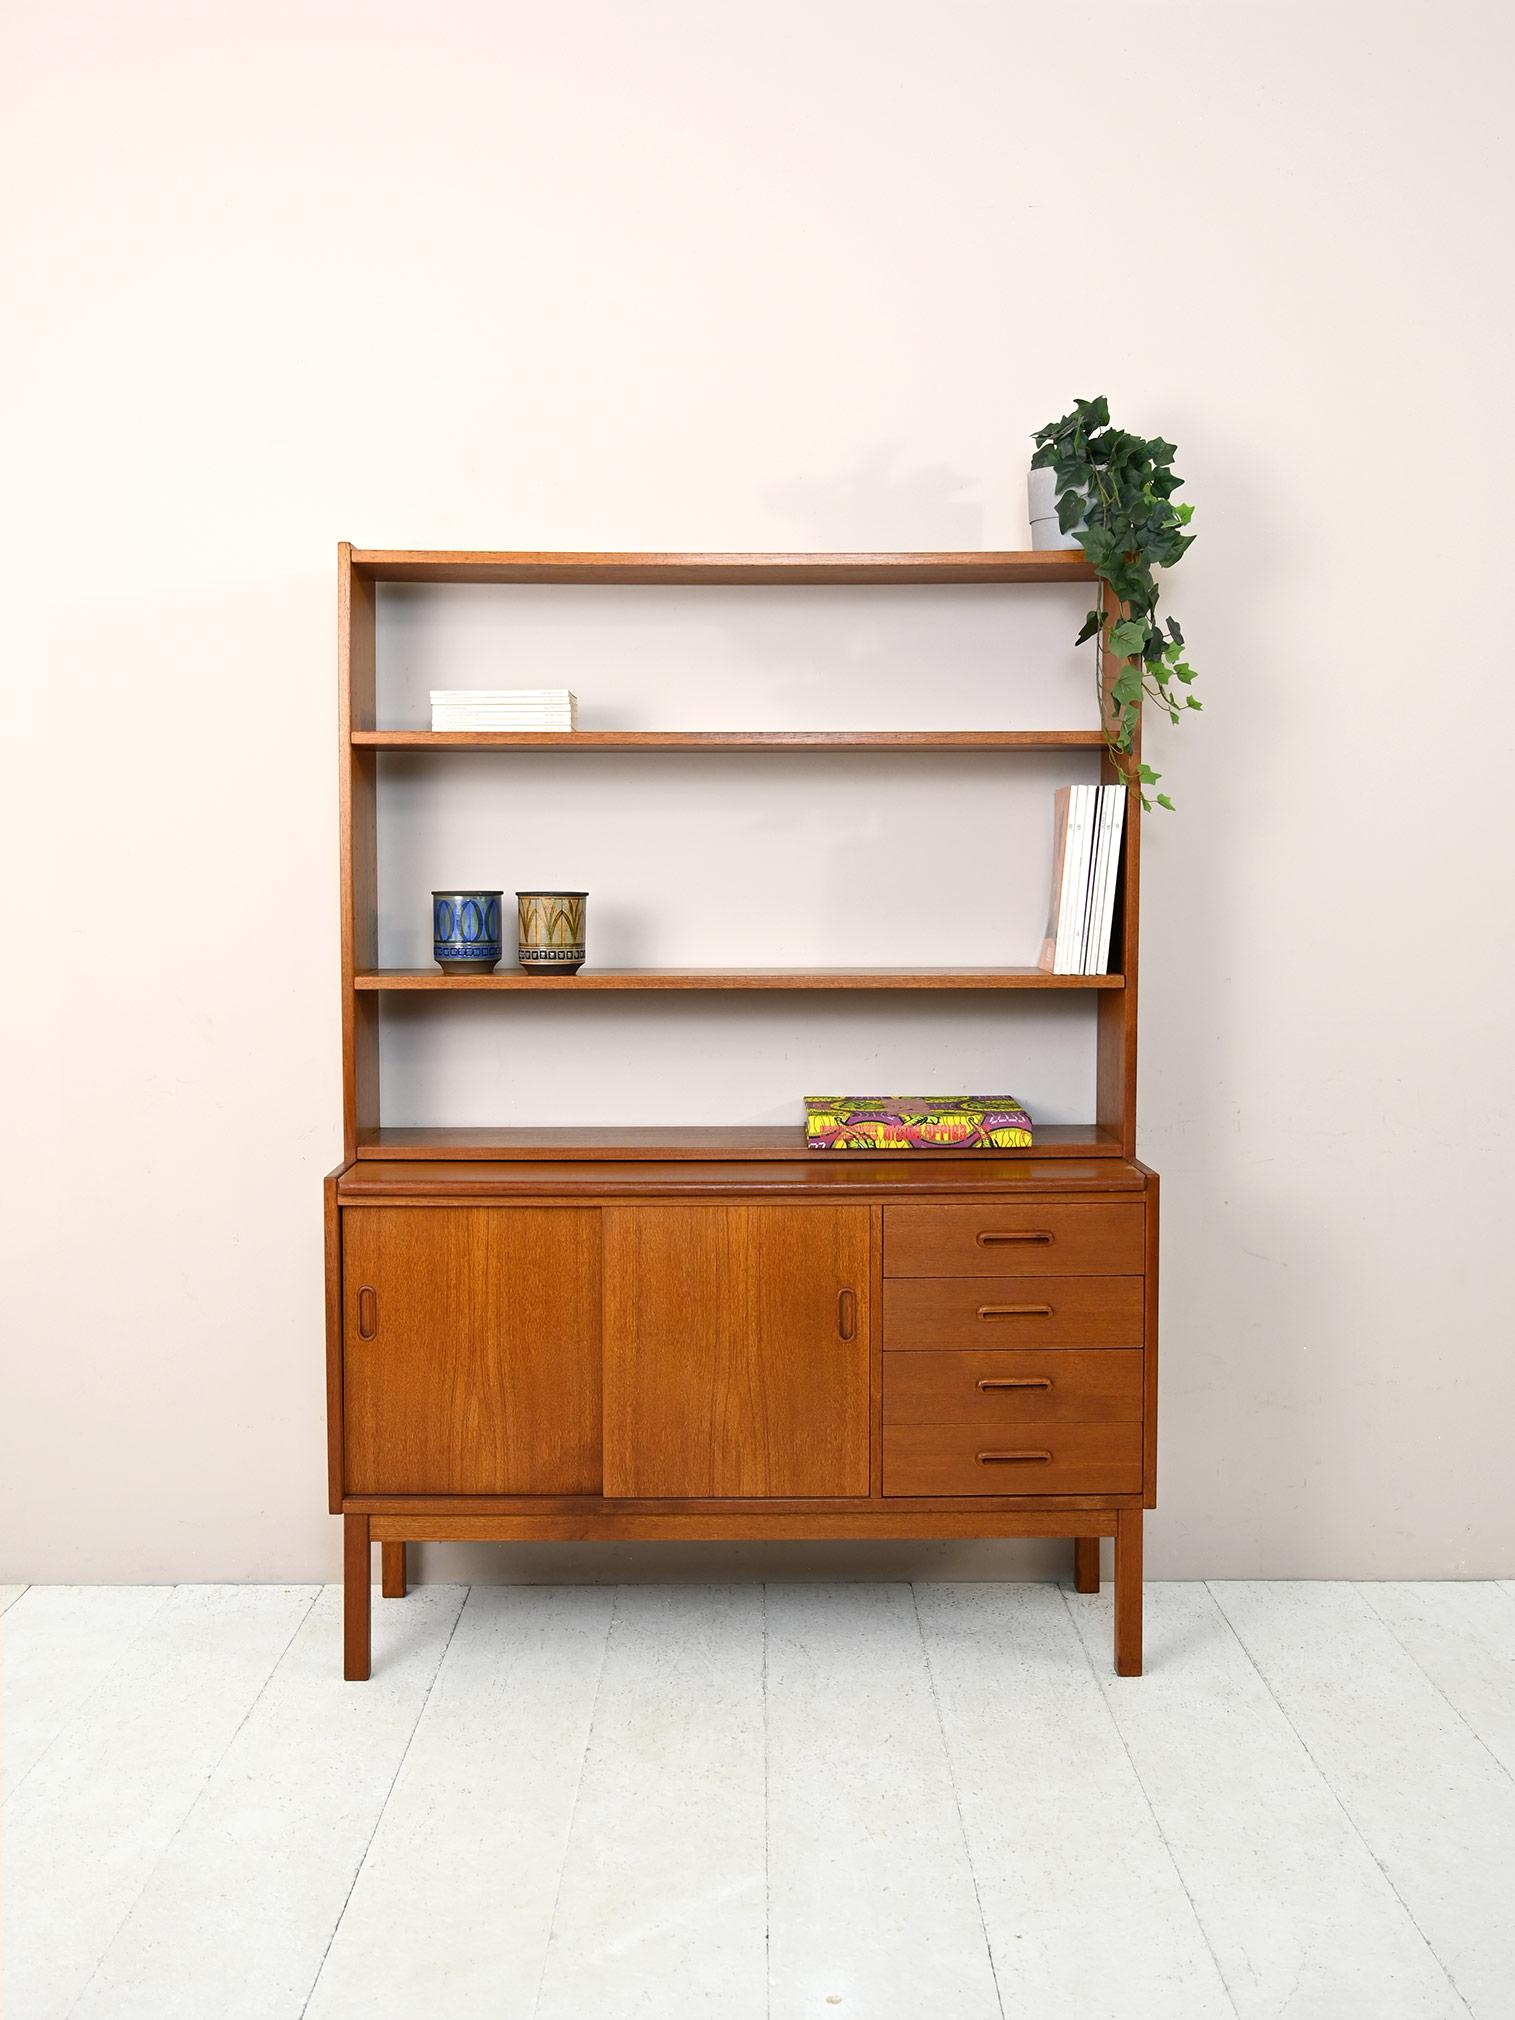 Vintage 1960s sideboard with shelving and pull-out top.

Swedish modern antique teak cabinet.
The lower part is a small sideboard equipped with sliding doors and 4 drawers. The pull-out top allows it to be transformed into a worktop for smart